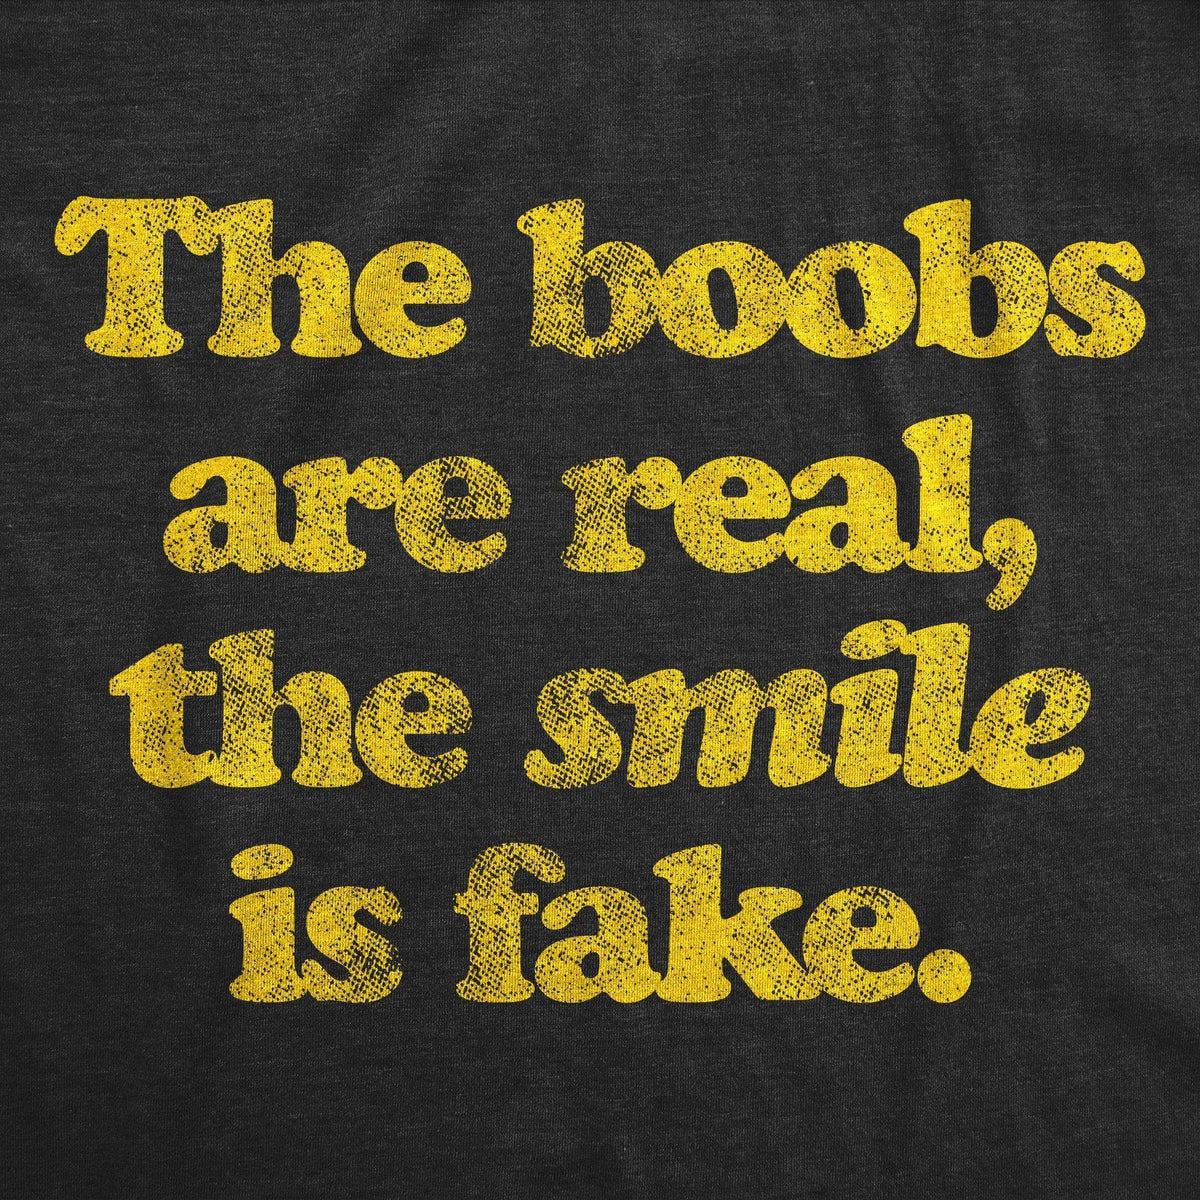 The Boobs Are Real The Smile Is Fake Women&#39;s Tshirt - Crazy Dog T-Shirts